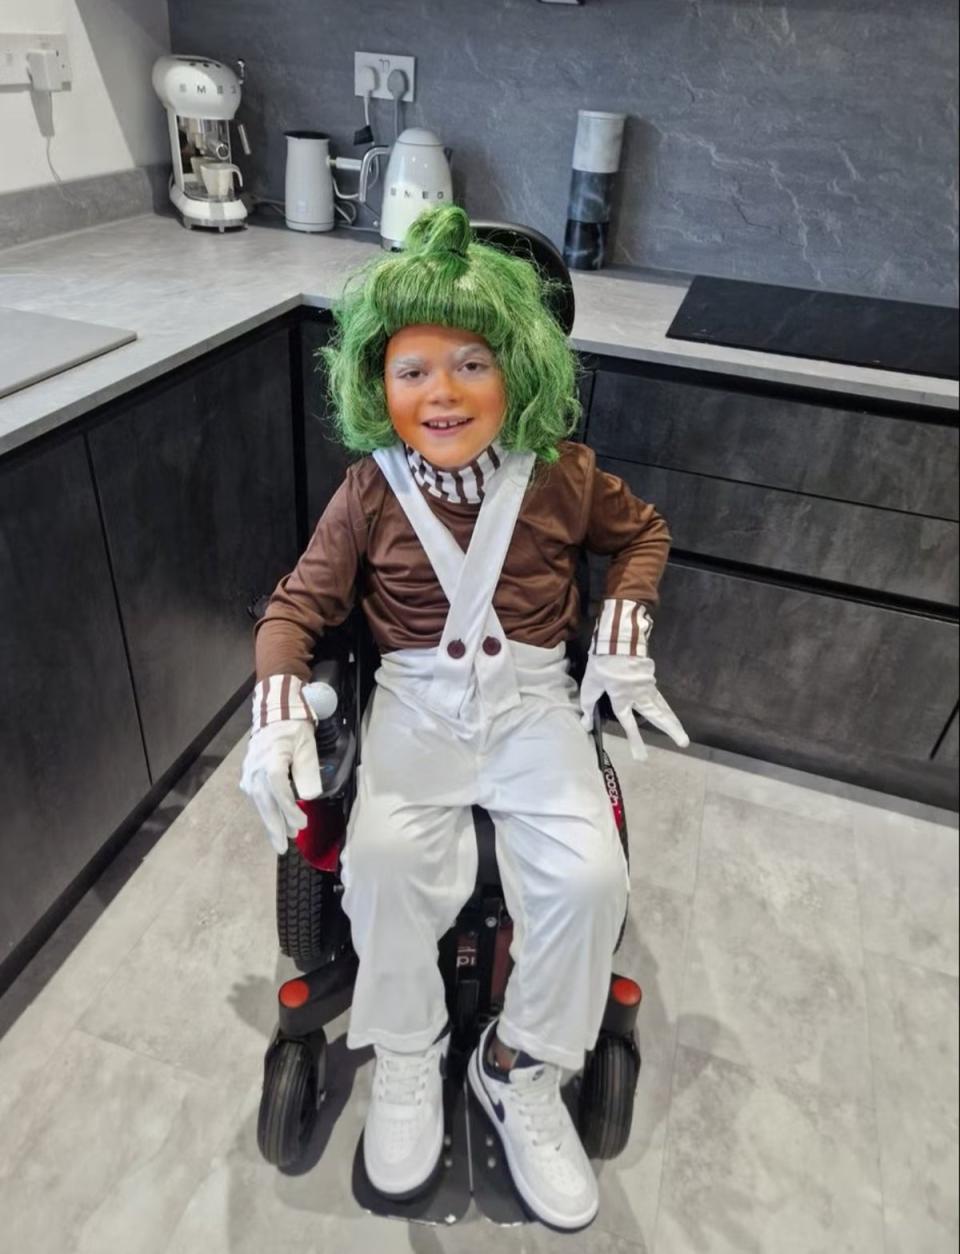 Owen loved his Oompa Loompa outfit (@Hazzy2_0)